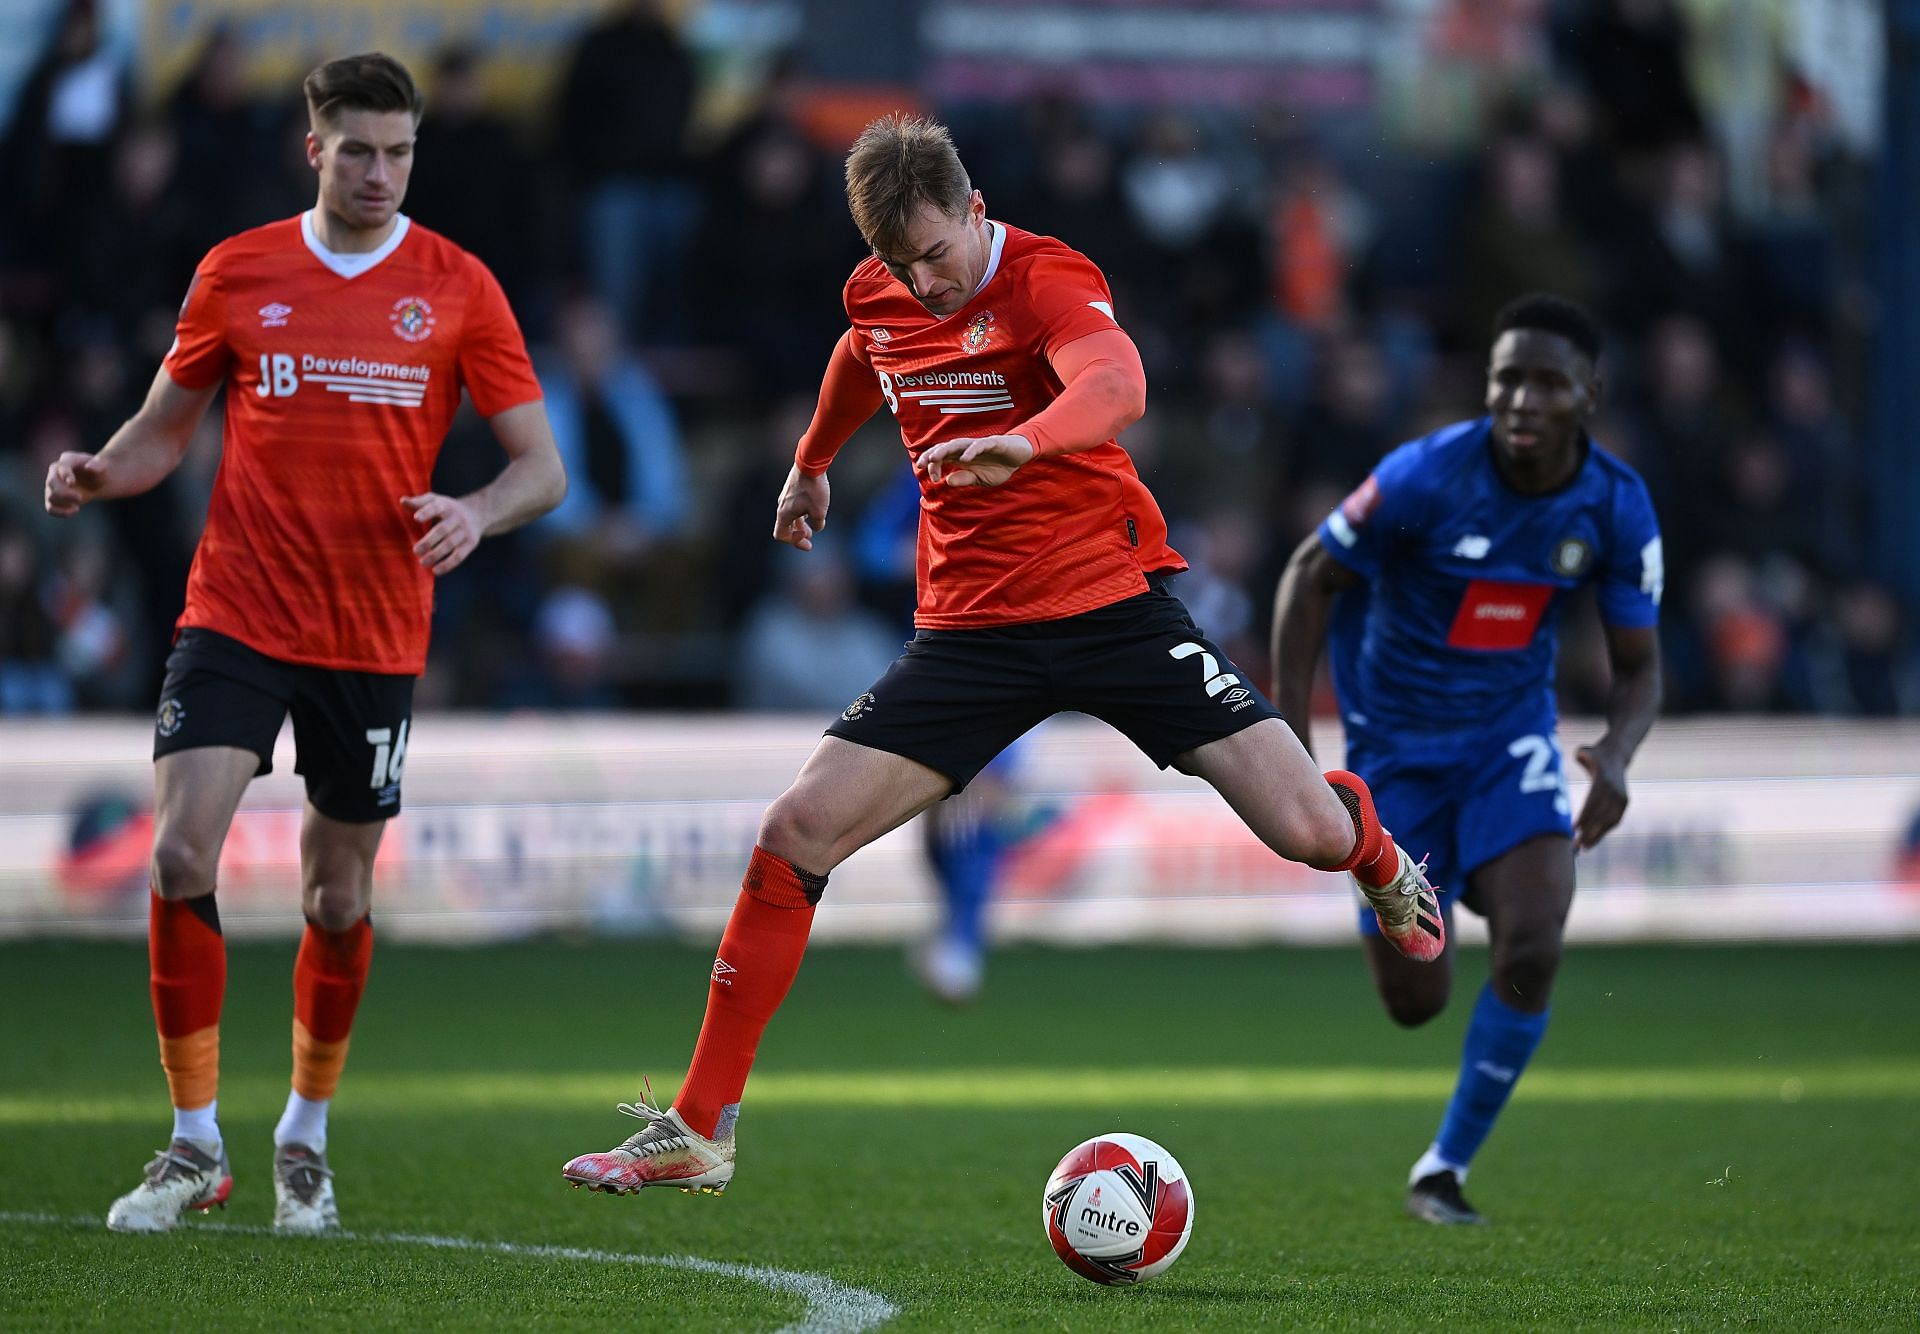 Luton Town are aiming for their third league win in a row